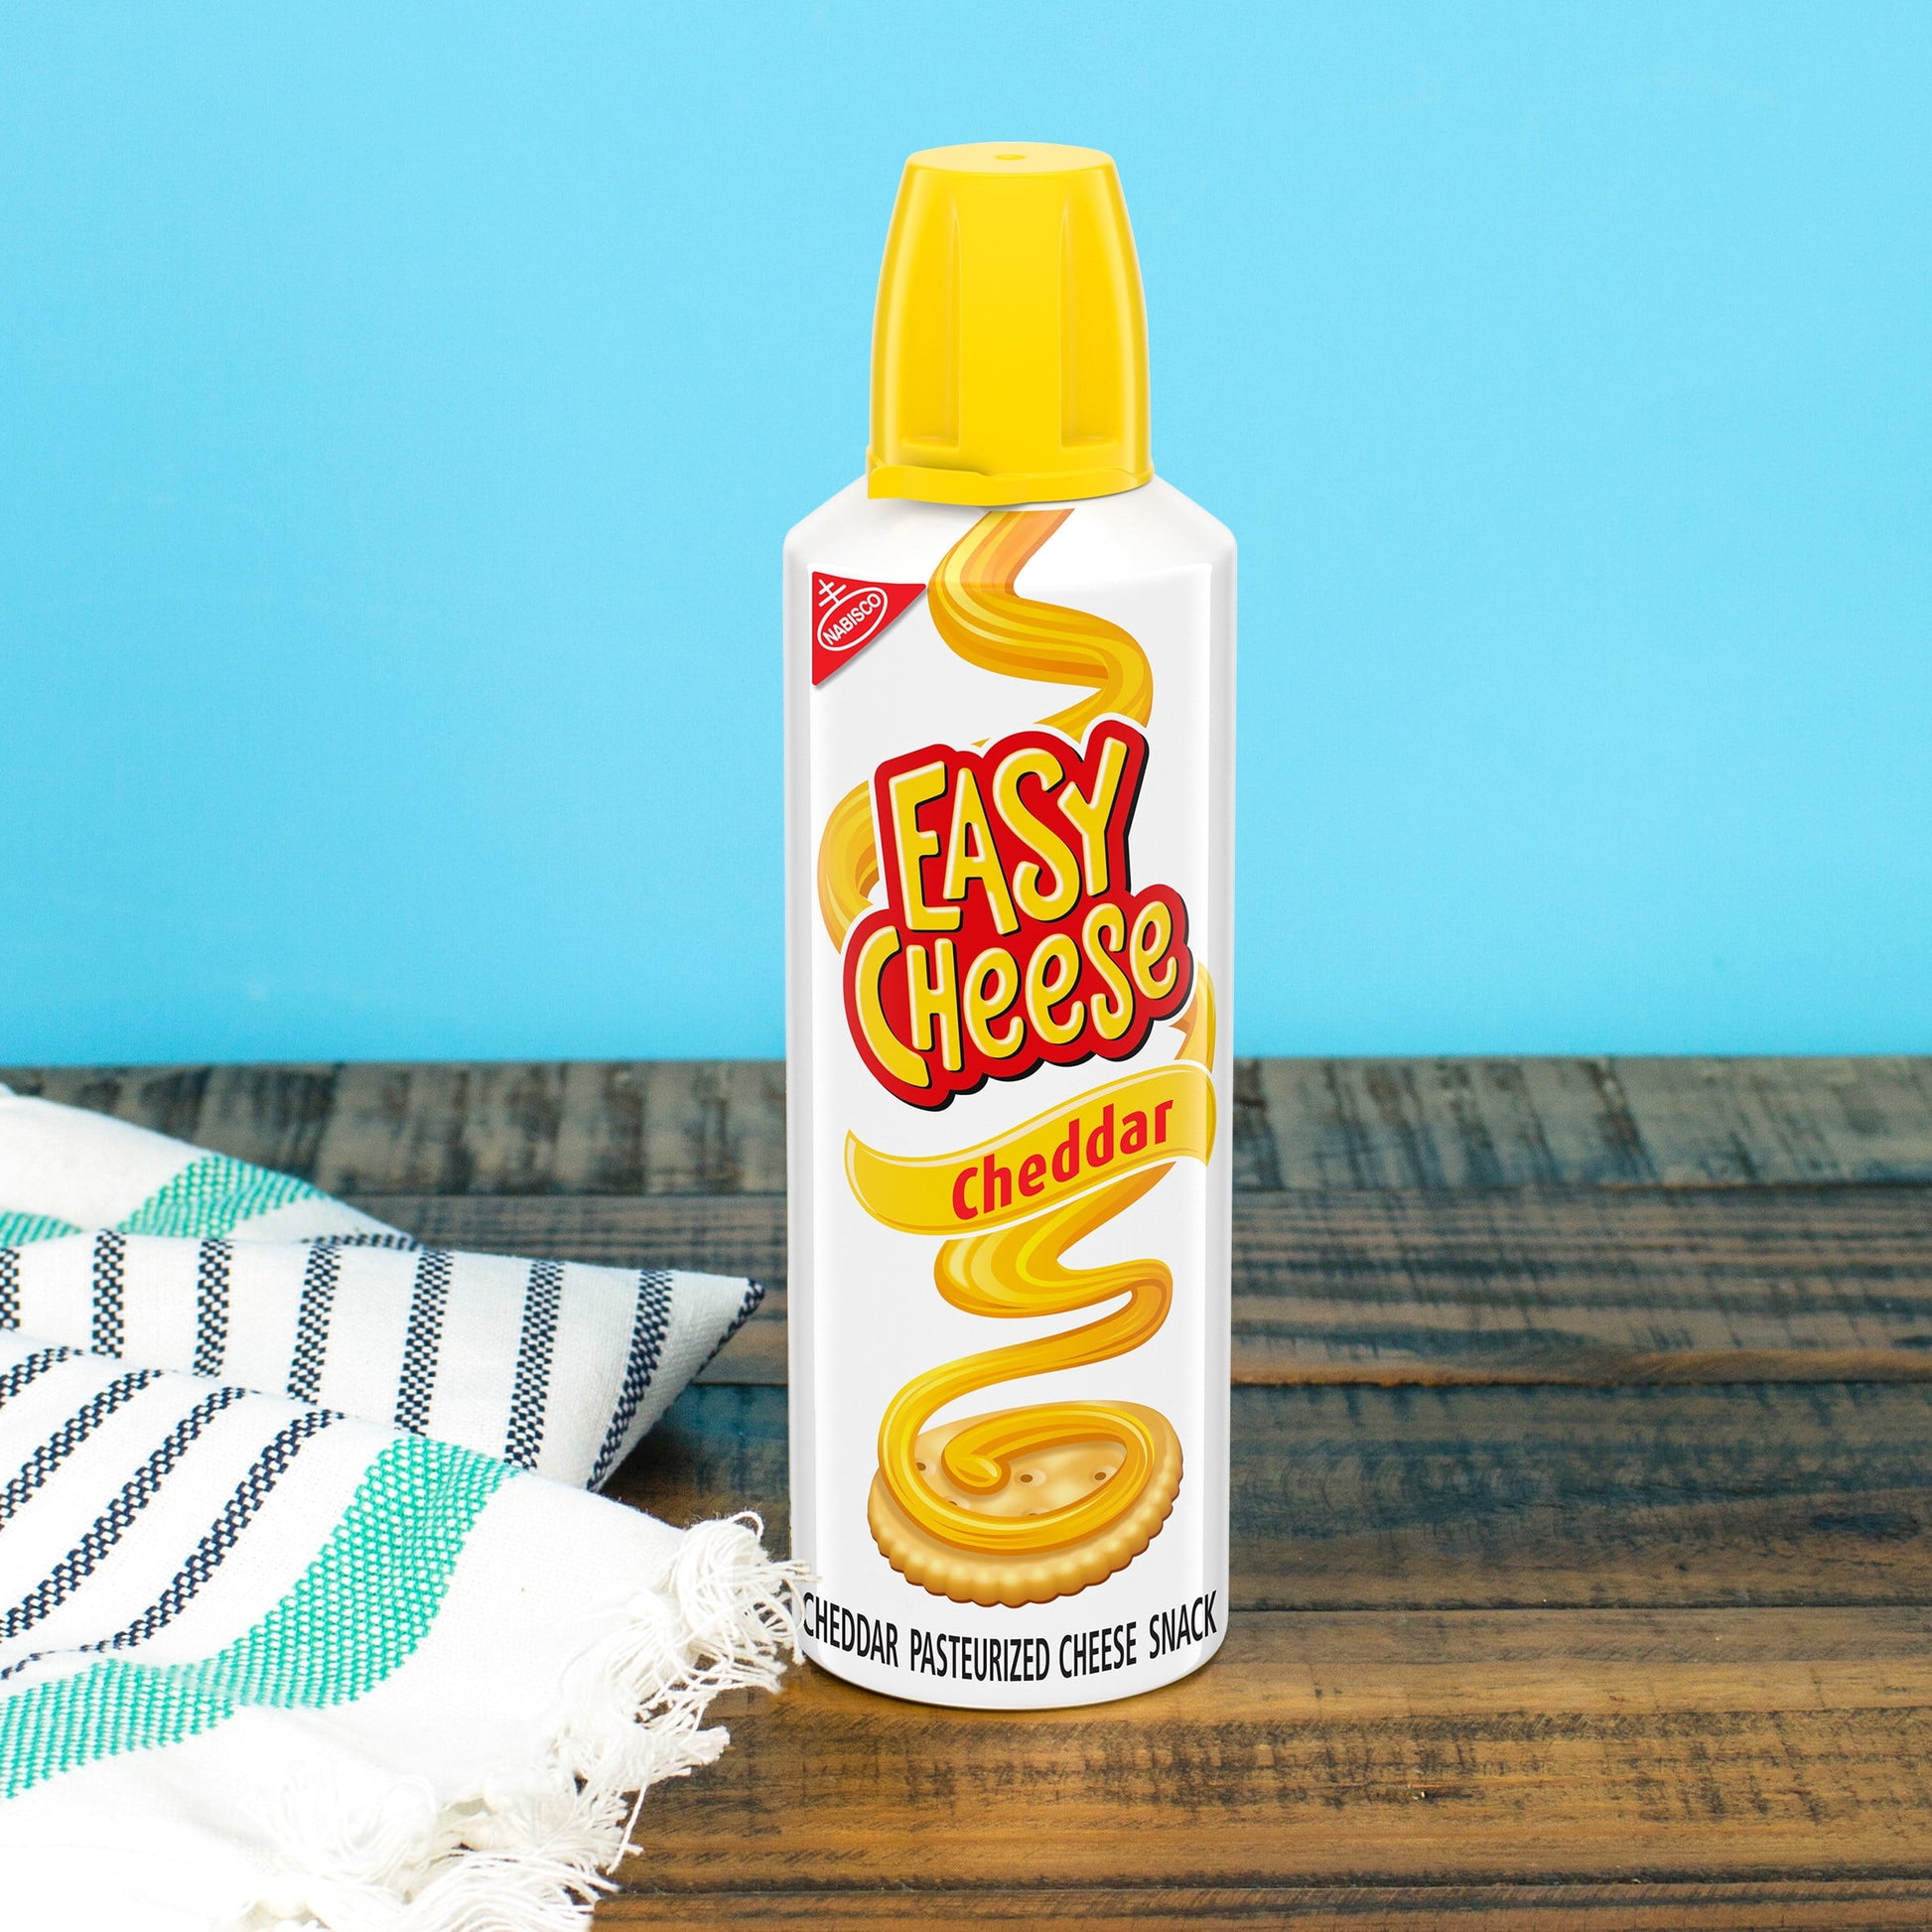 Easy Cheese Cheddar Cheese Snack, 8 Oz